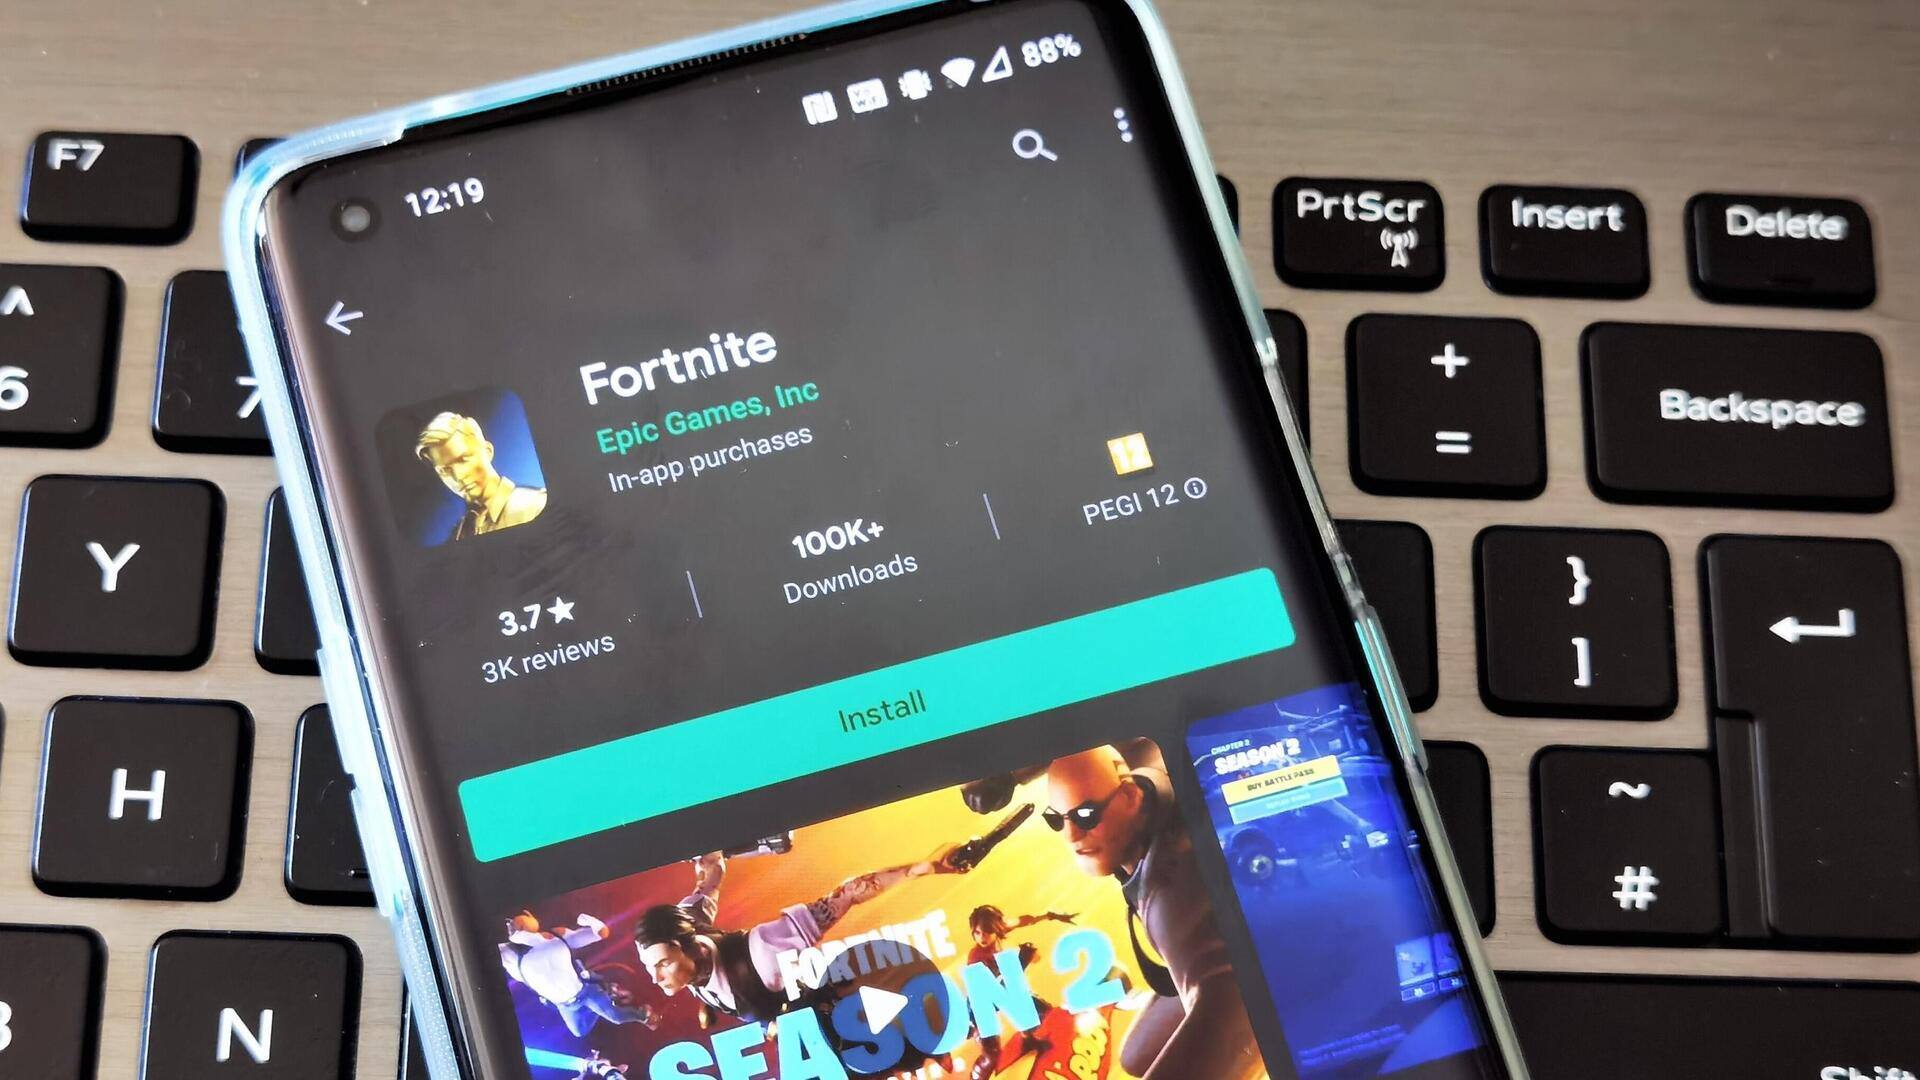 Google offered Epic $147mn to bring Fortnite to Play Store